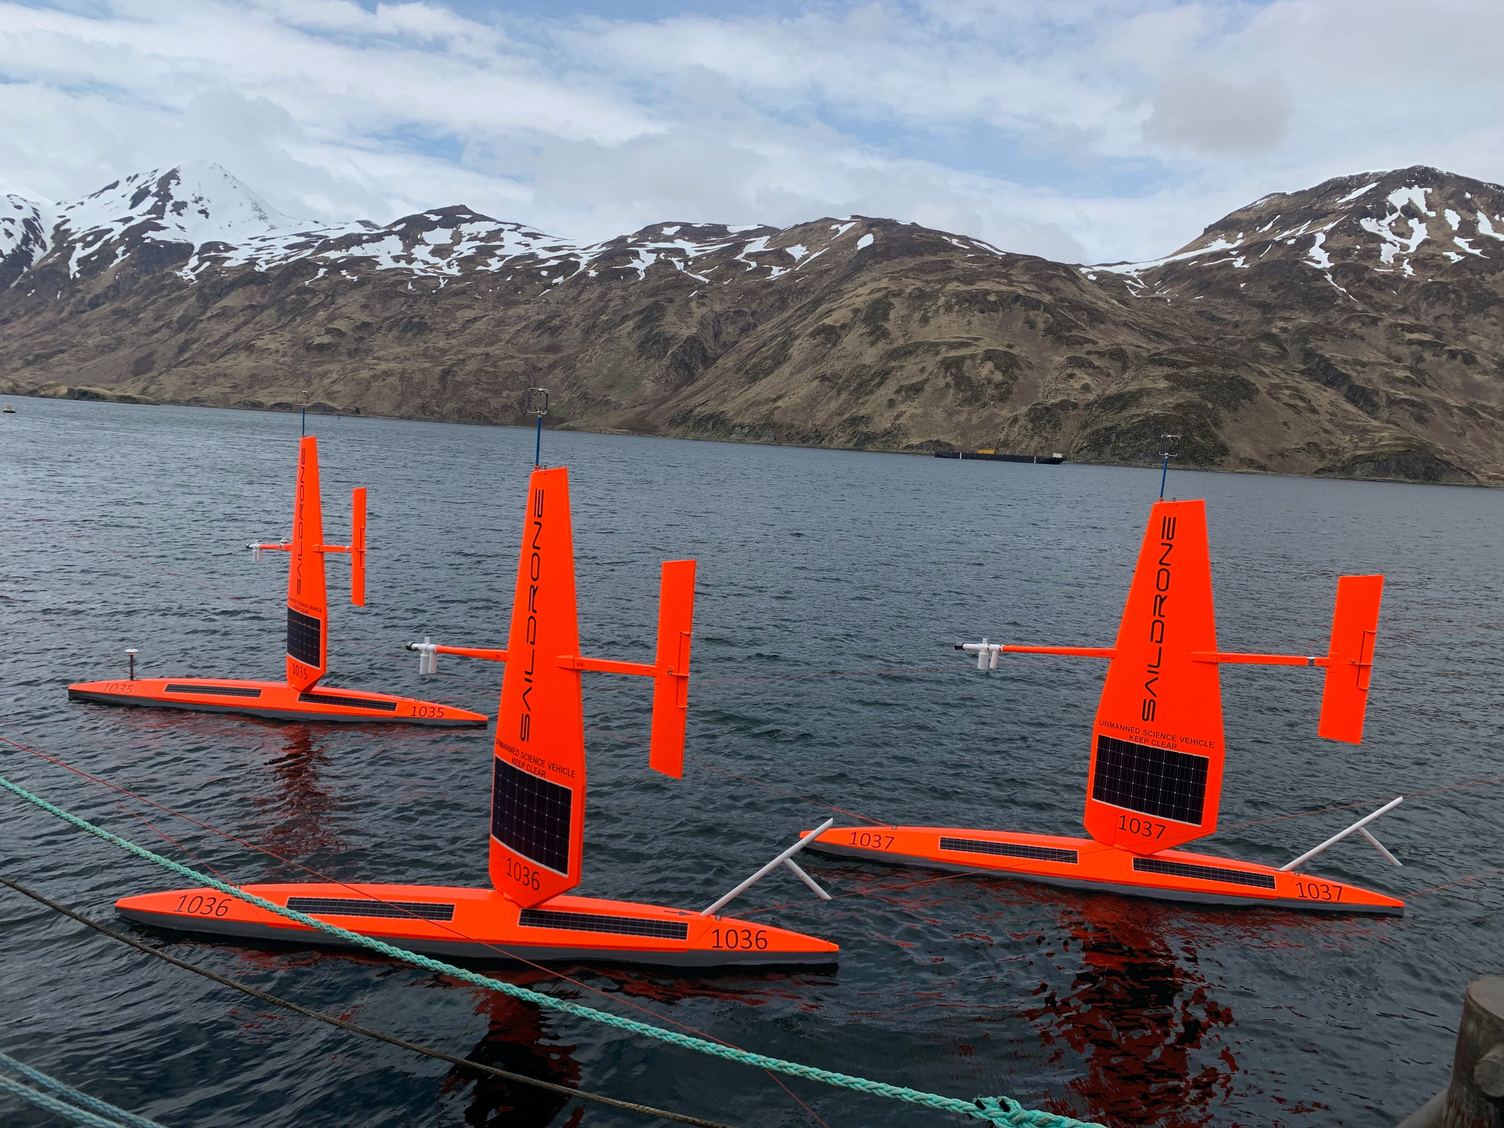 Several Saildrone vessels float in formation on the ocean.